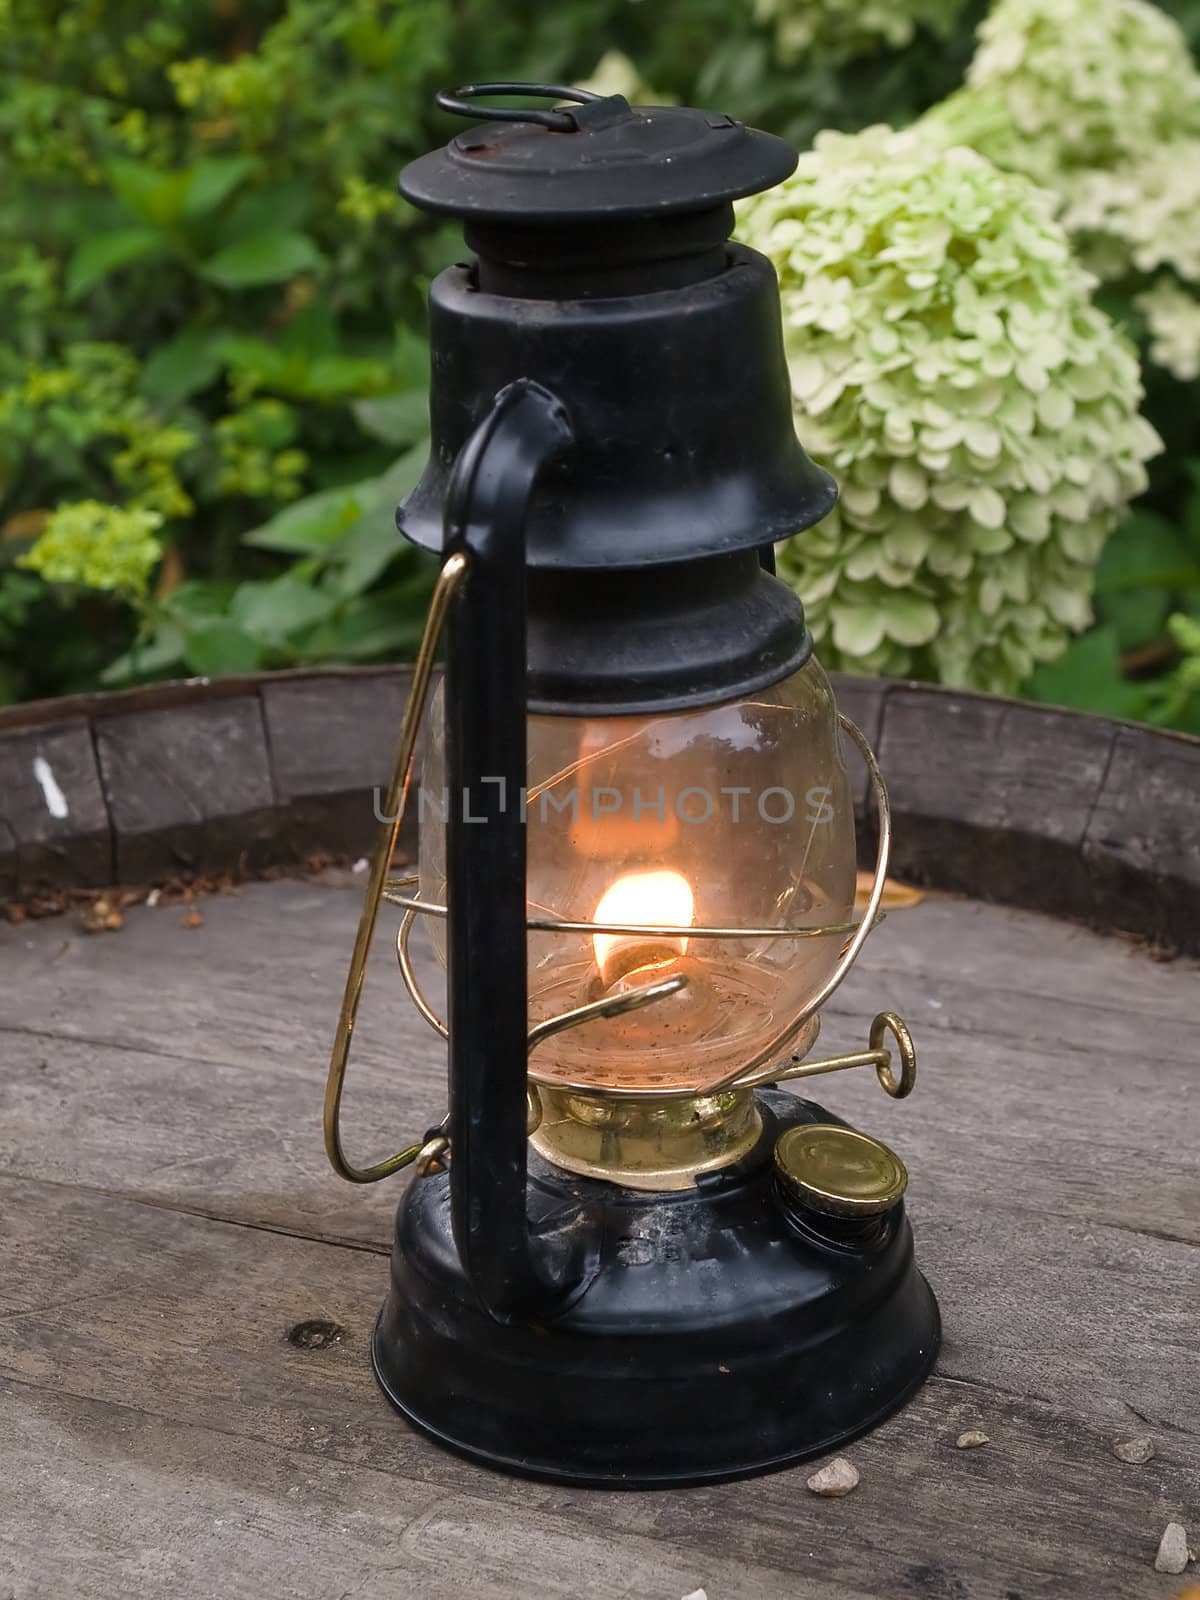 Classical nautical oil lamp burns on a wooden barrel outdoors